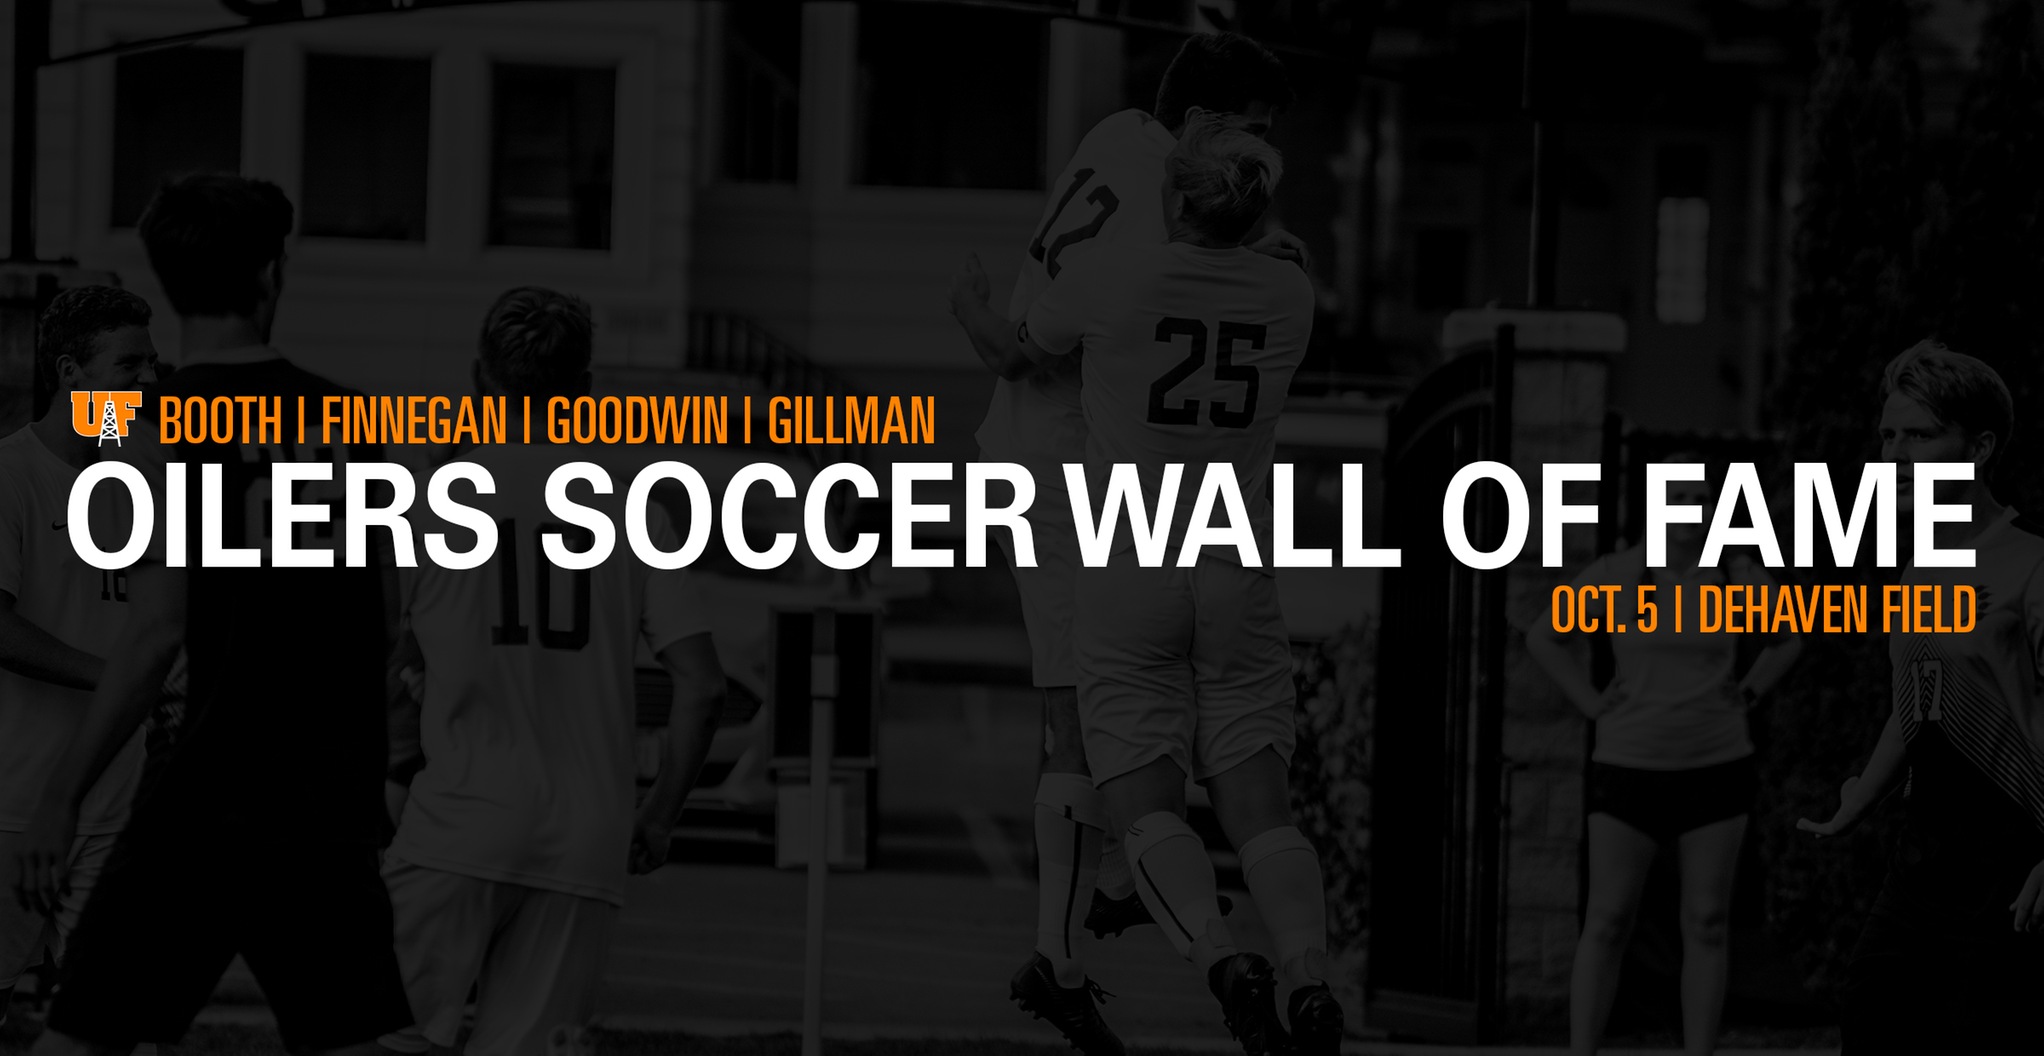 Oilers Soccer Wall of Fame Scheduled for Oct. 5